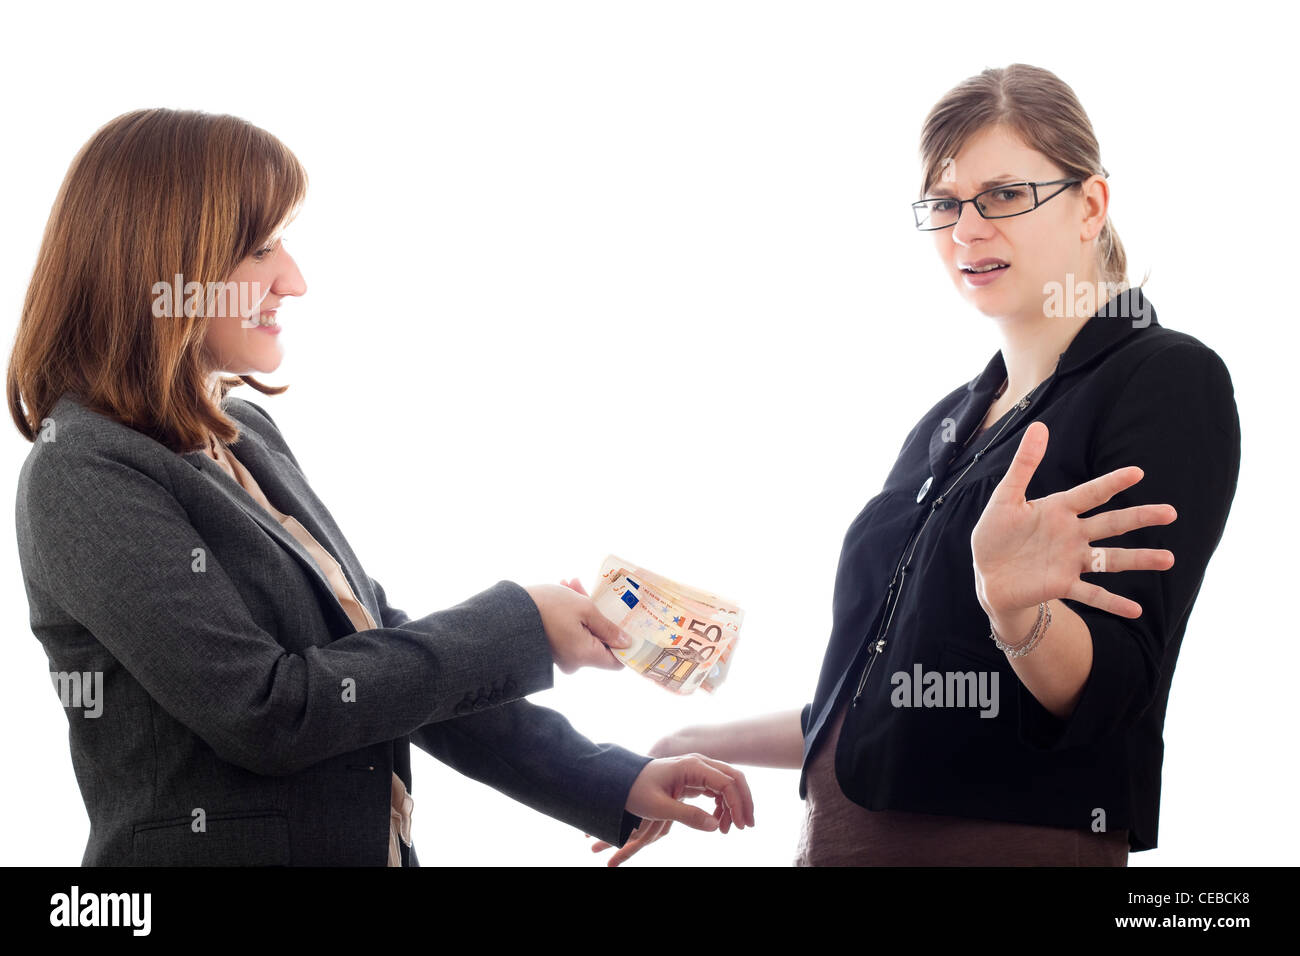 Two corrupted business women bribe with Euro bank notes, isolated on white background. Stock Photo